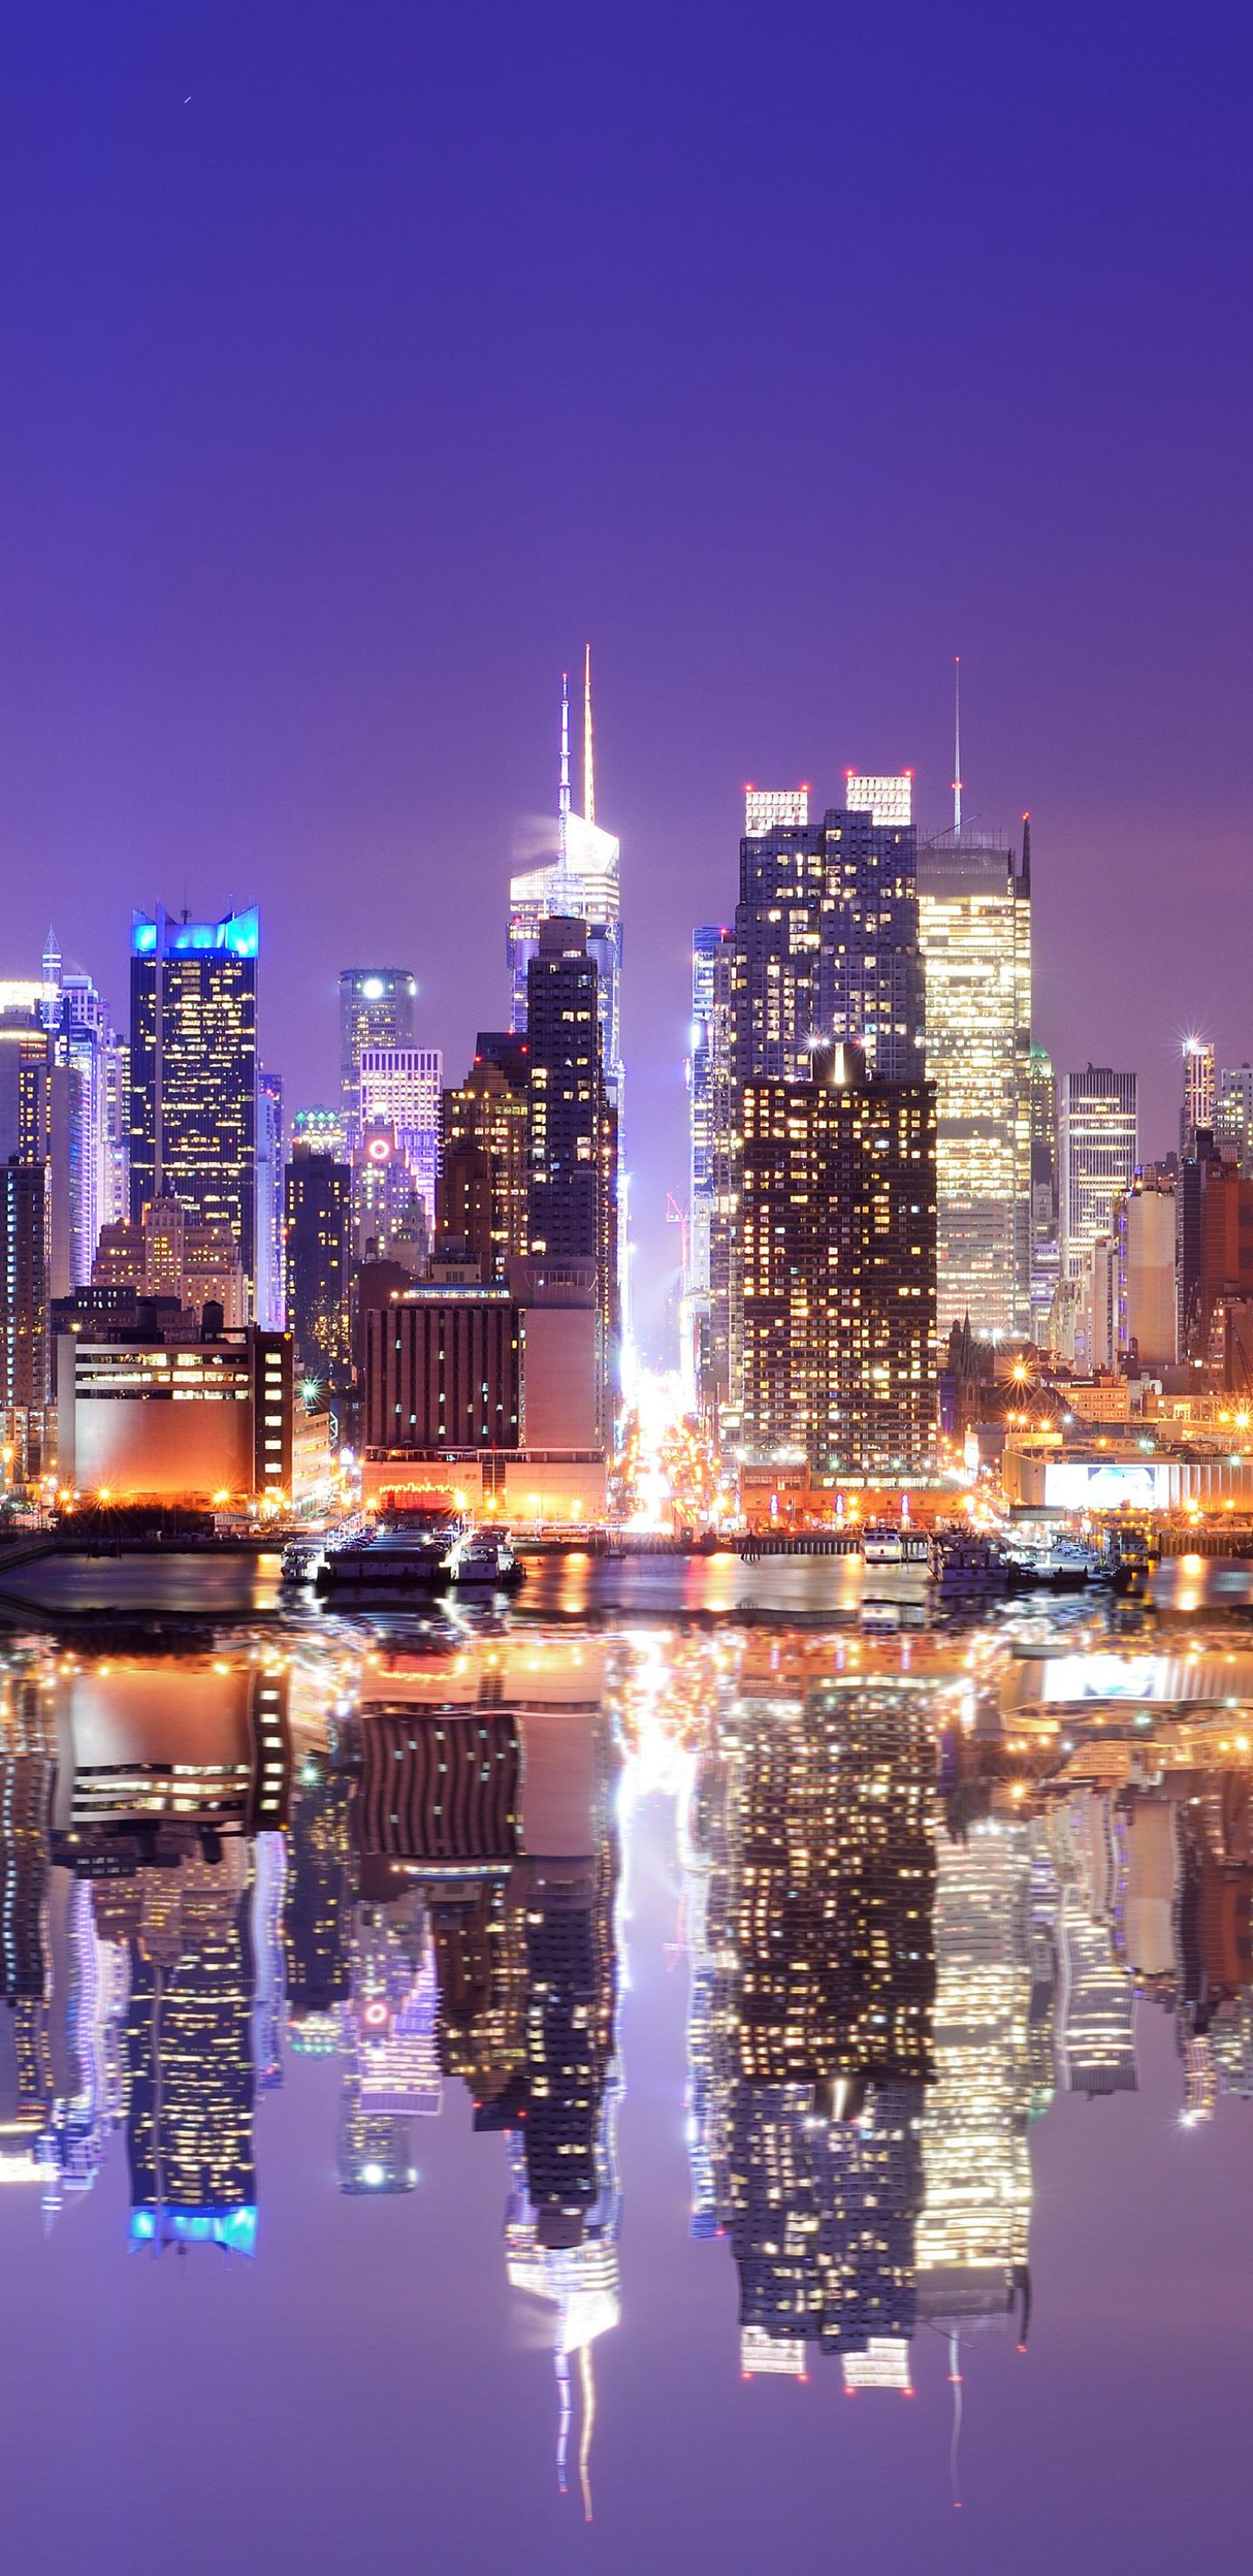 New york aesthetic collage Wallpaper Download